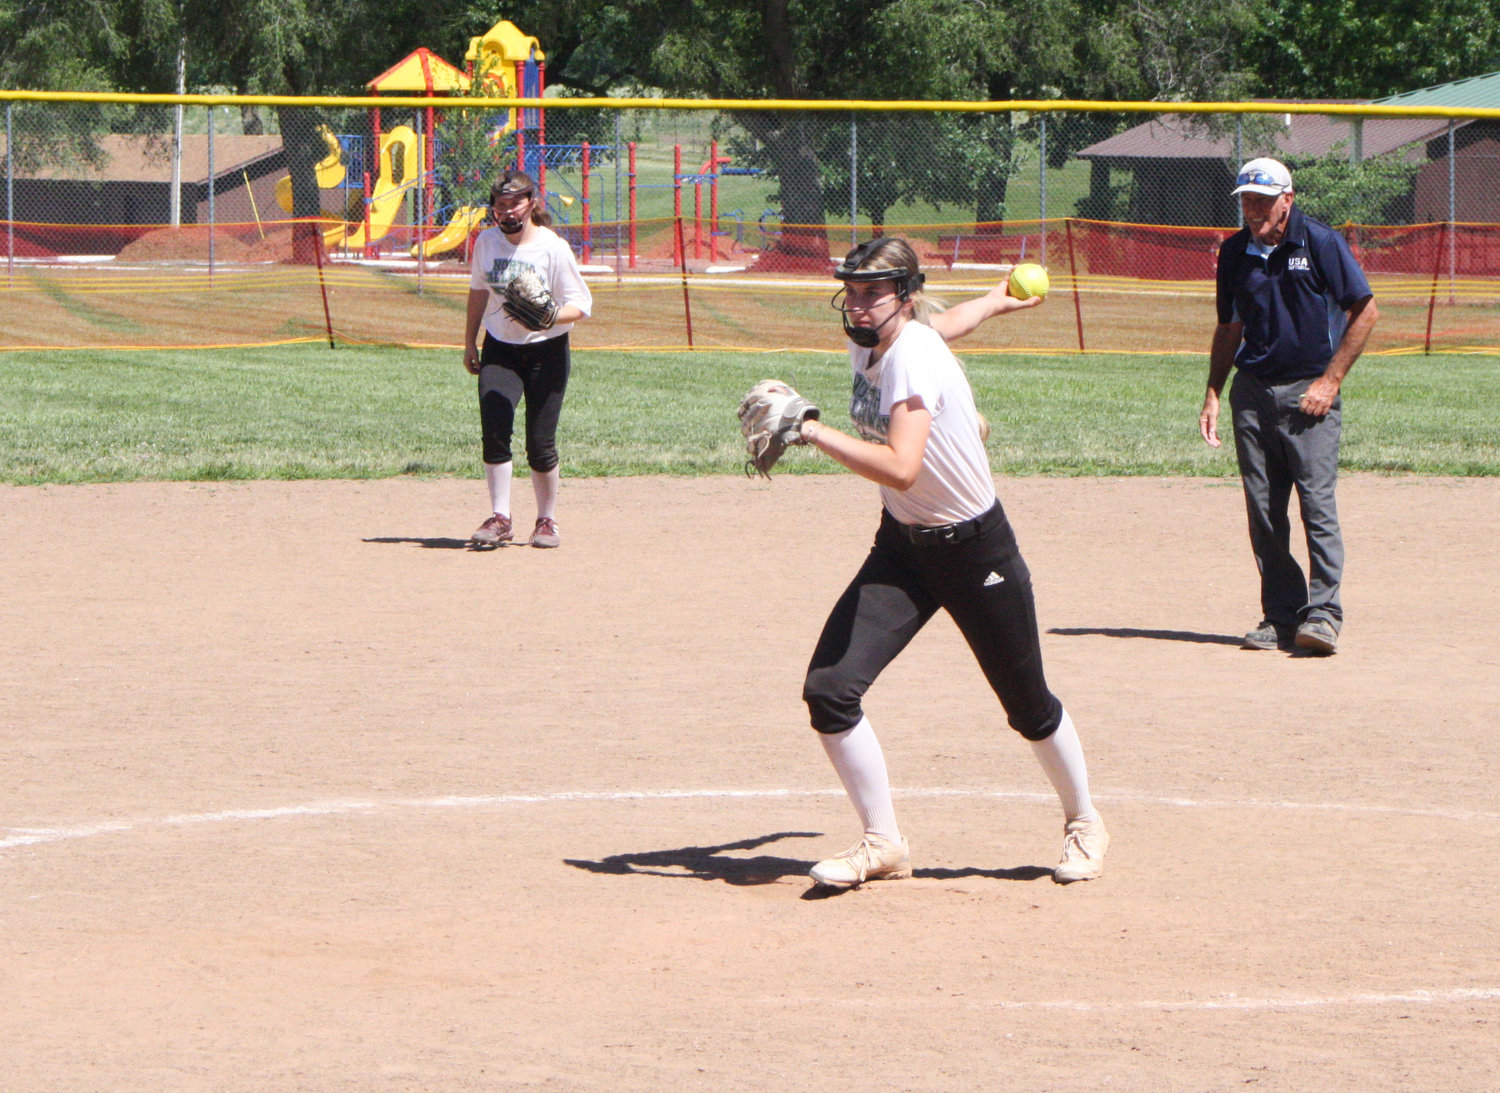 North Callaway freshman pitcher/infielder Olivia Knoepflein pitches June 22 during a scrimmage at Centralia.